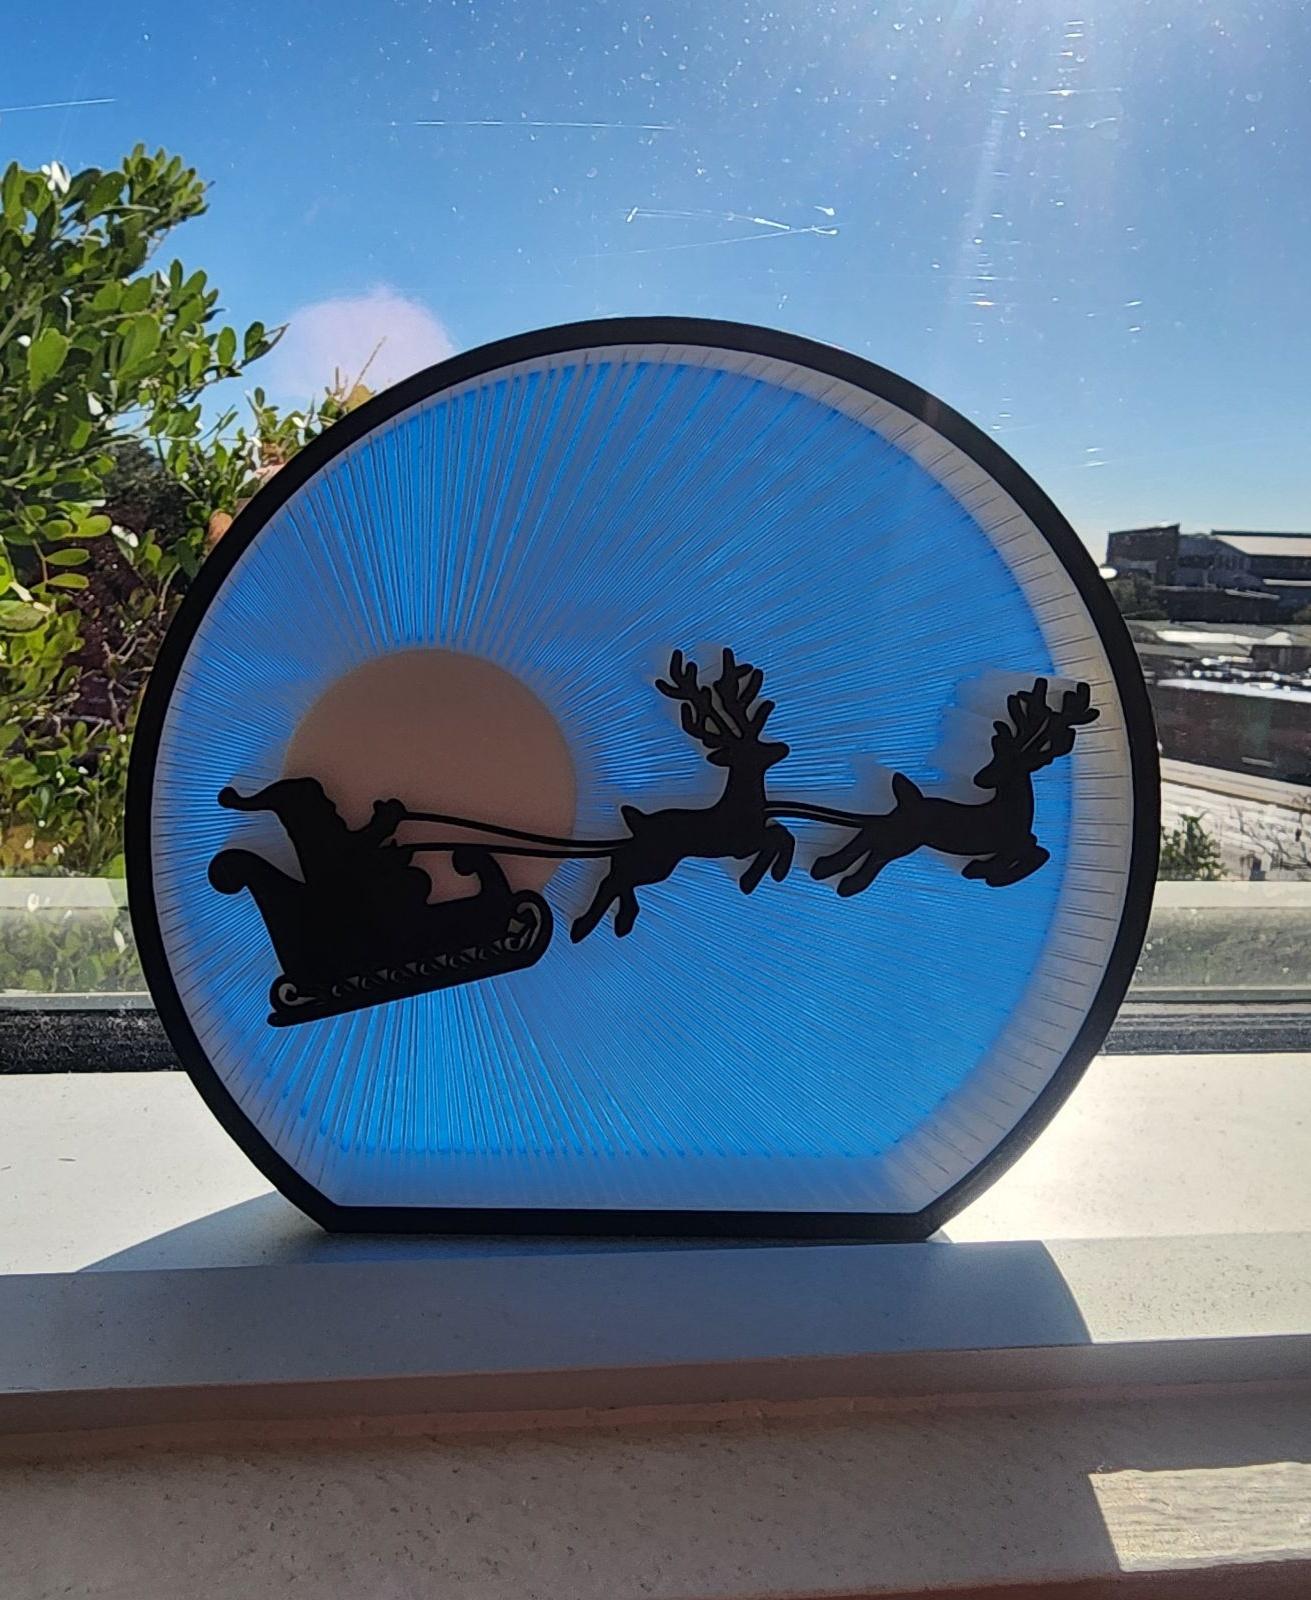 Moonlight Santa String Art - turned out awesome on my bambu x1c. thanks! - 3d model